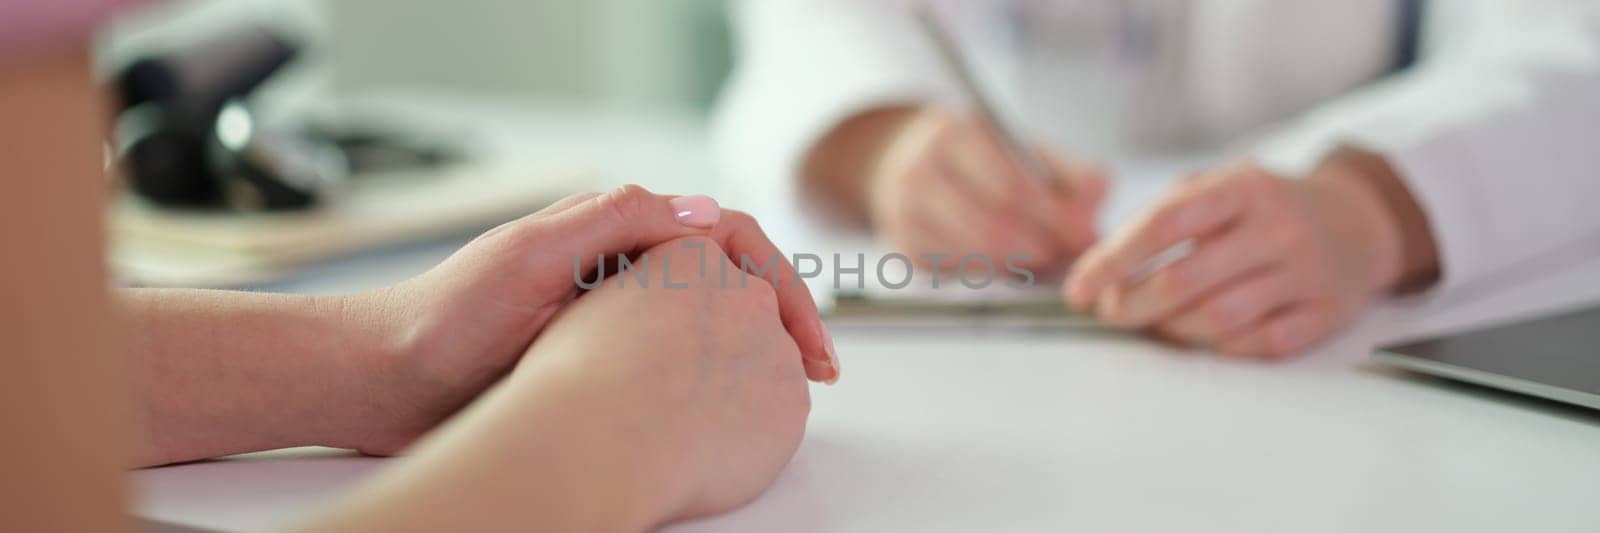 Patient hands on table during visit to doctor in clinic closeup. Medicare concept